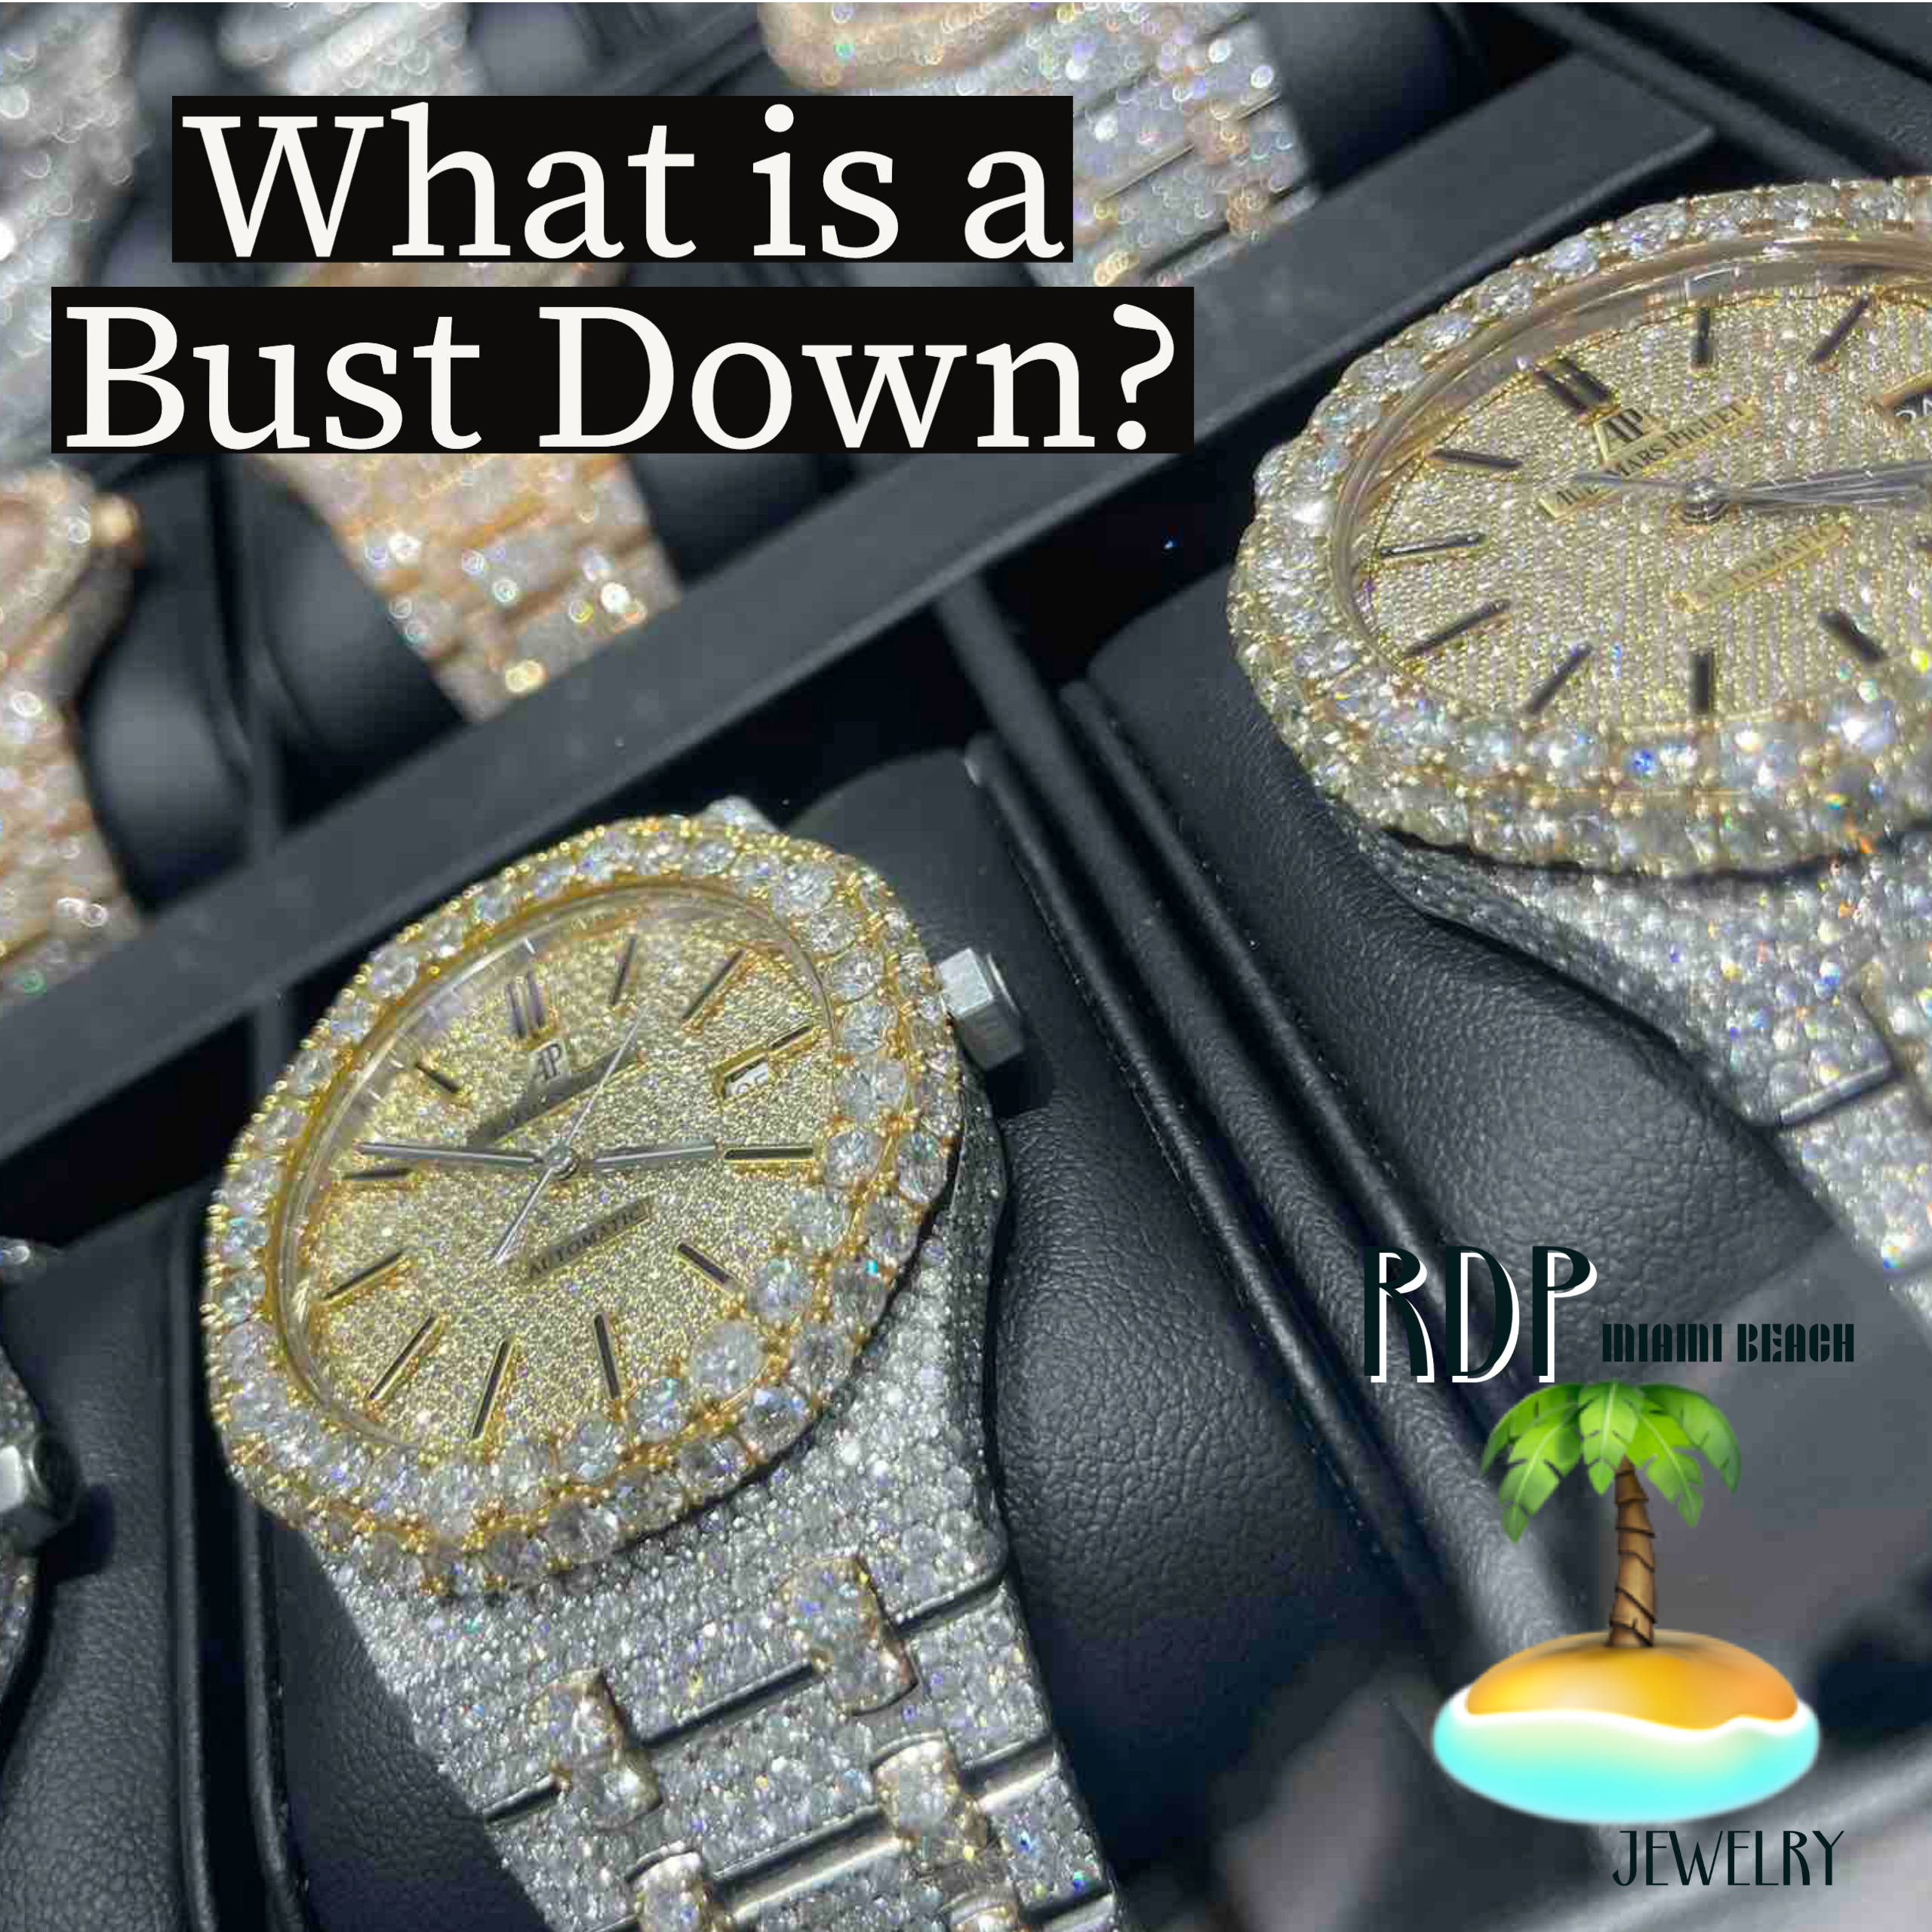 What is a Bust Down?